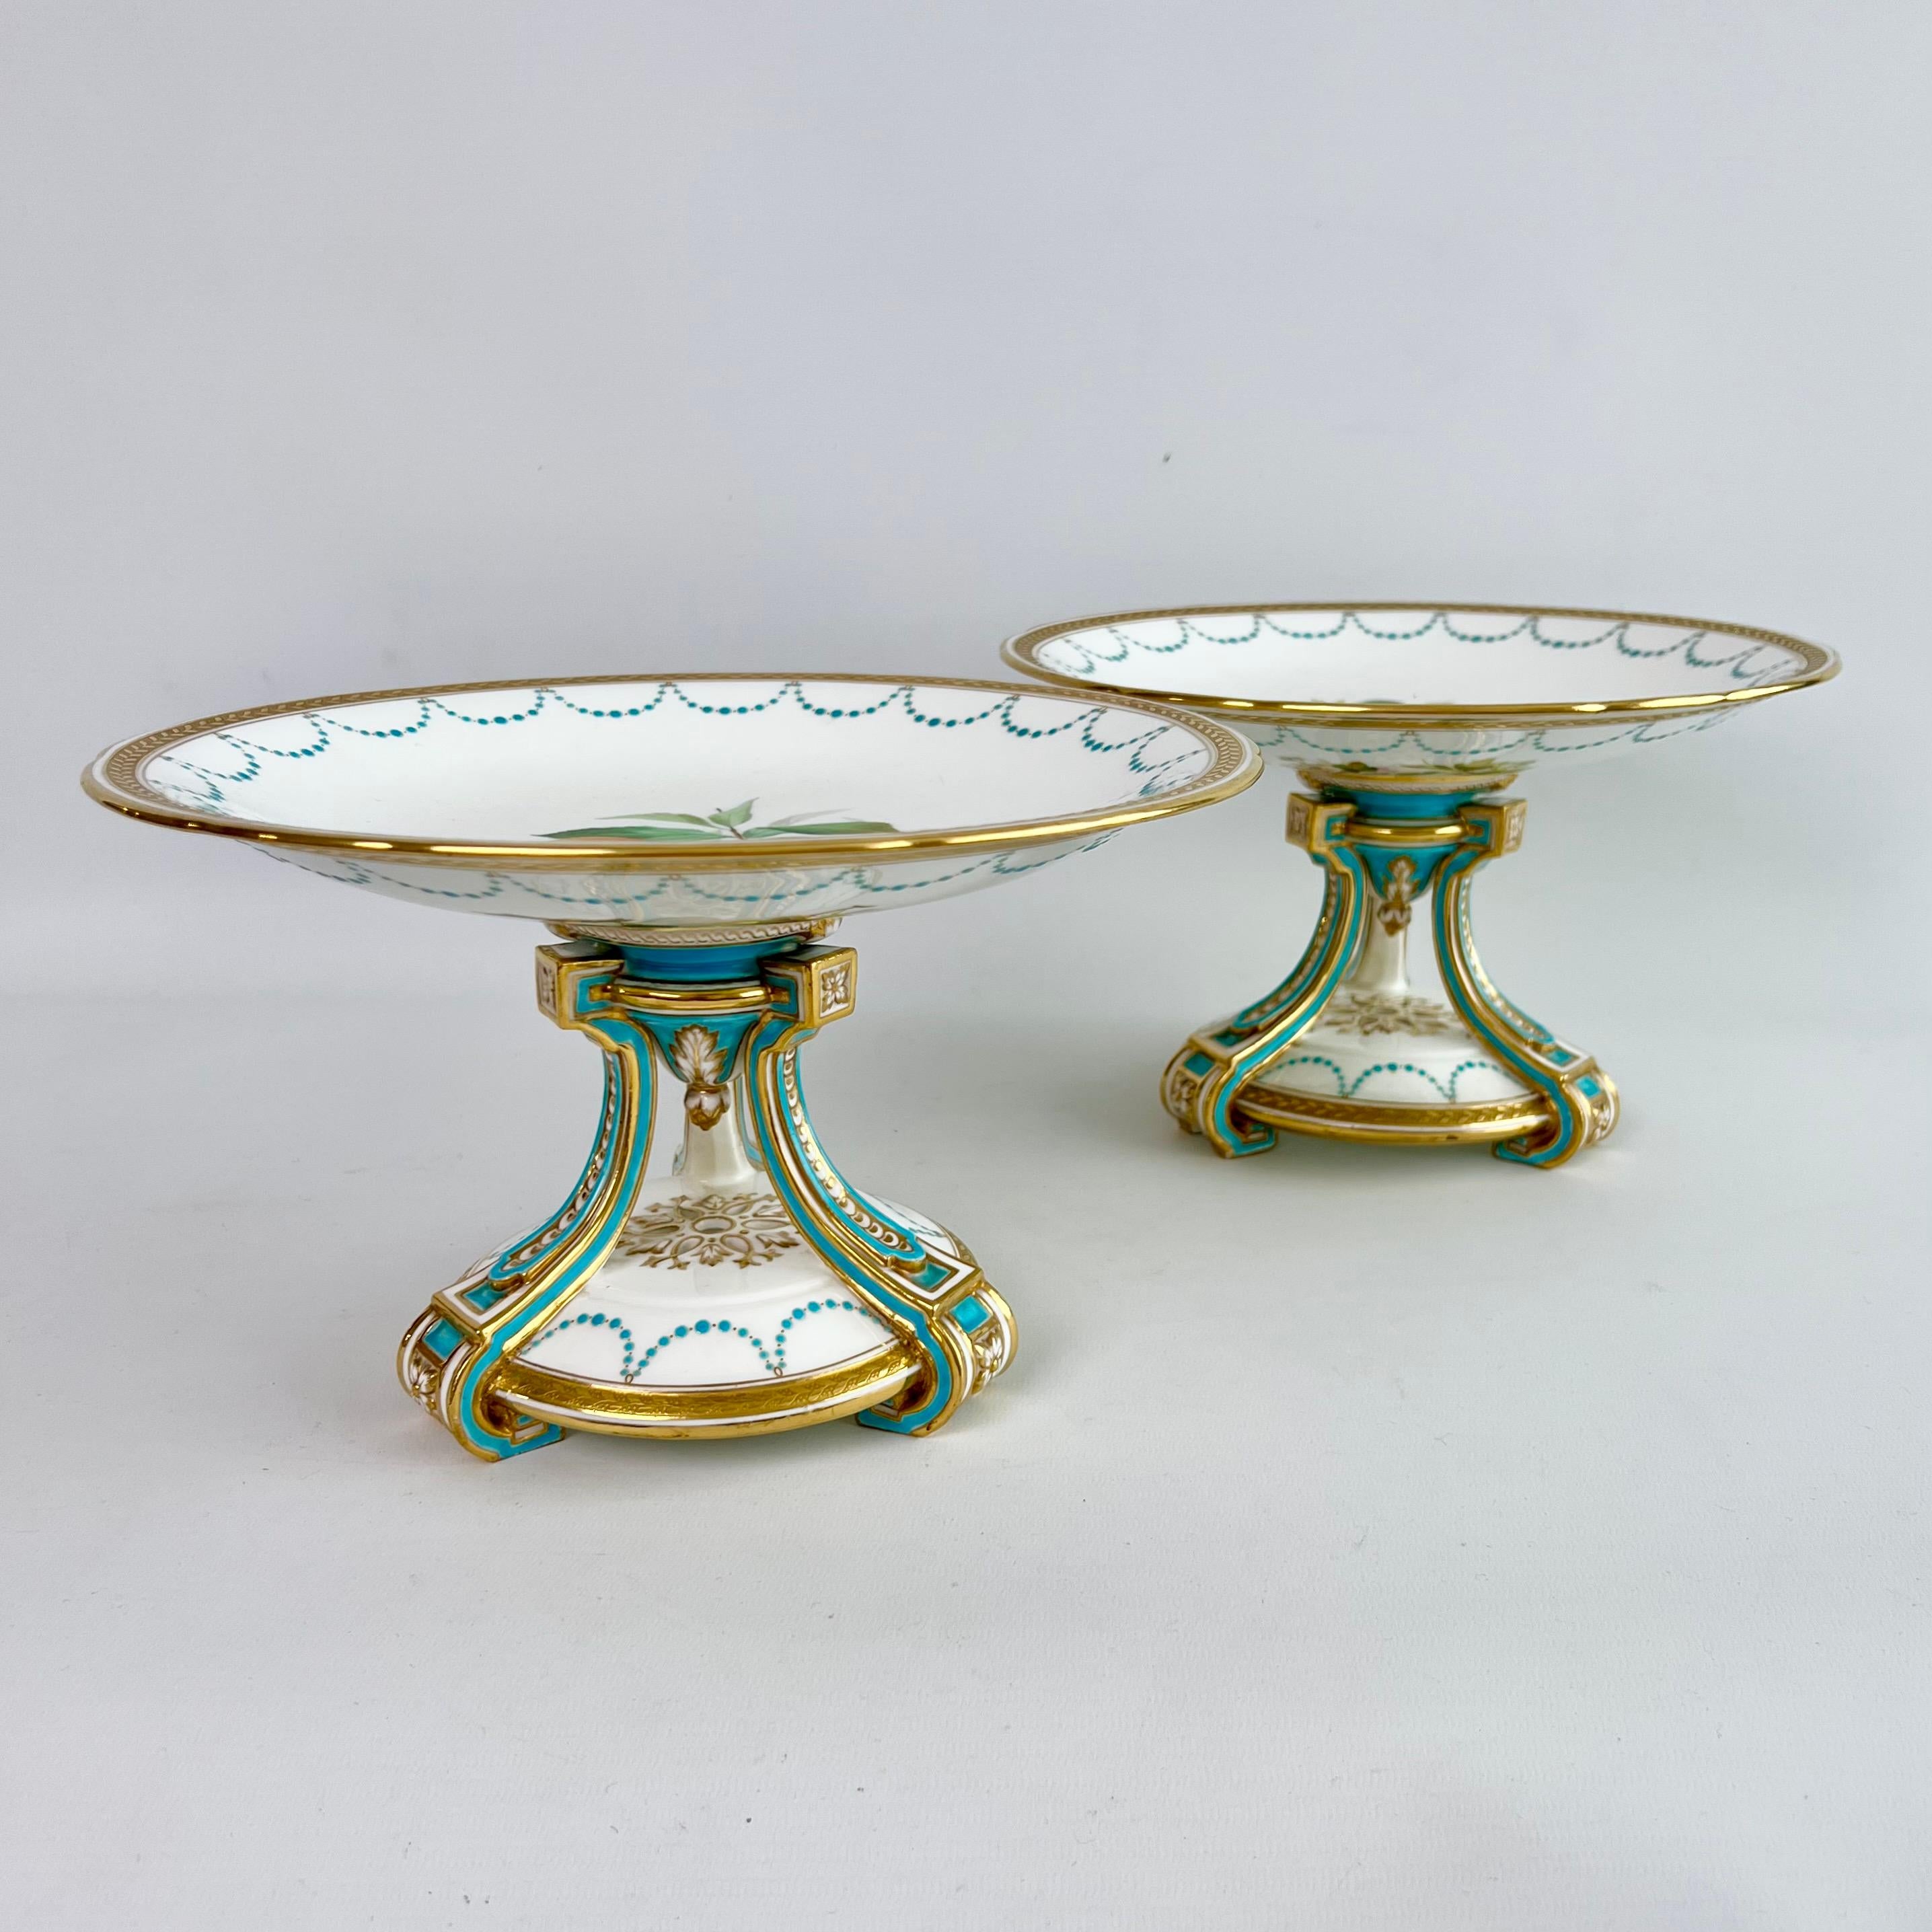 Victorian Minton Porcelain Dessert Service, Turquoise and Gilt, Flowers and Fruits, 1870